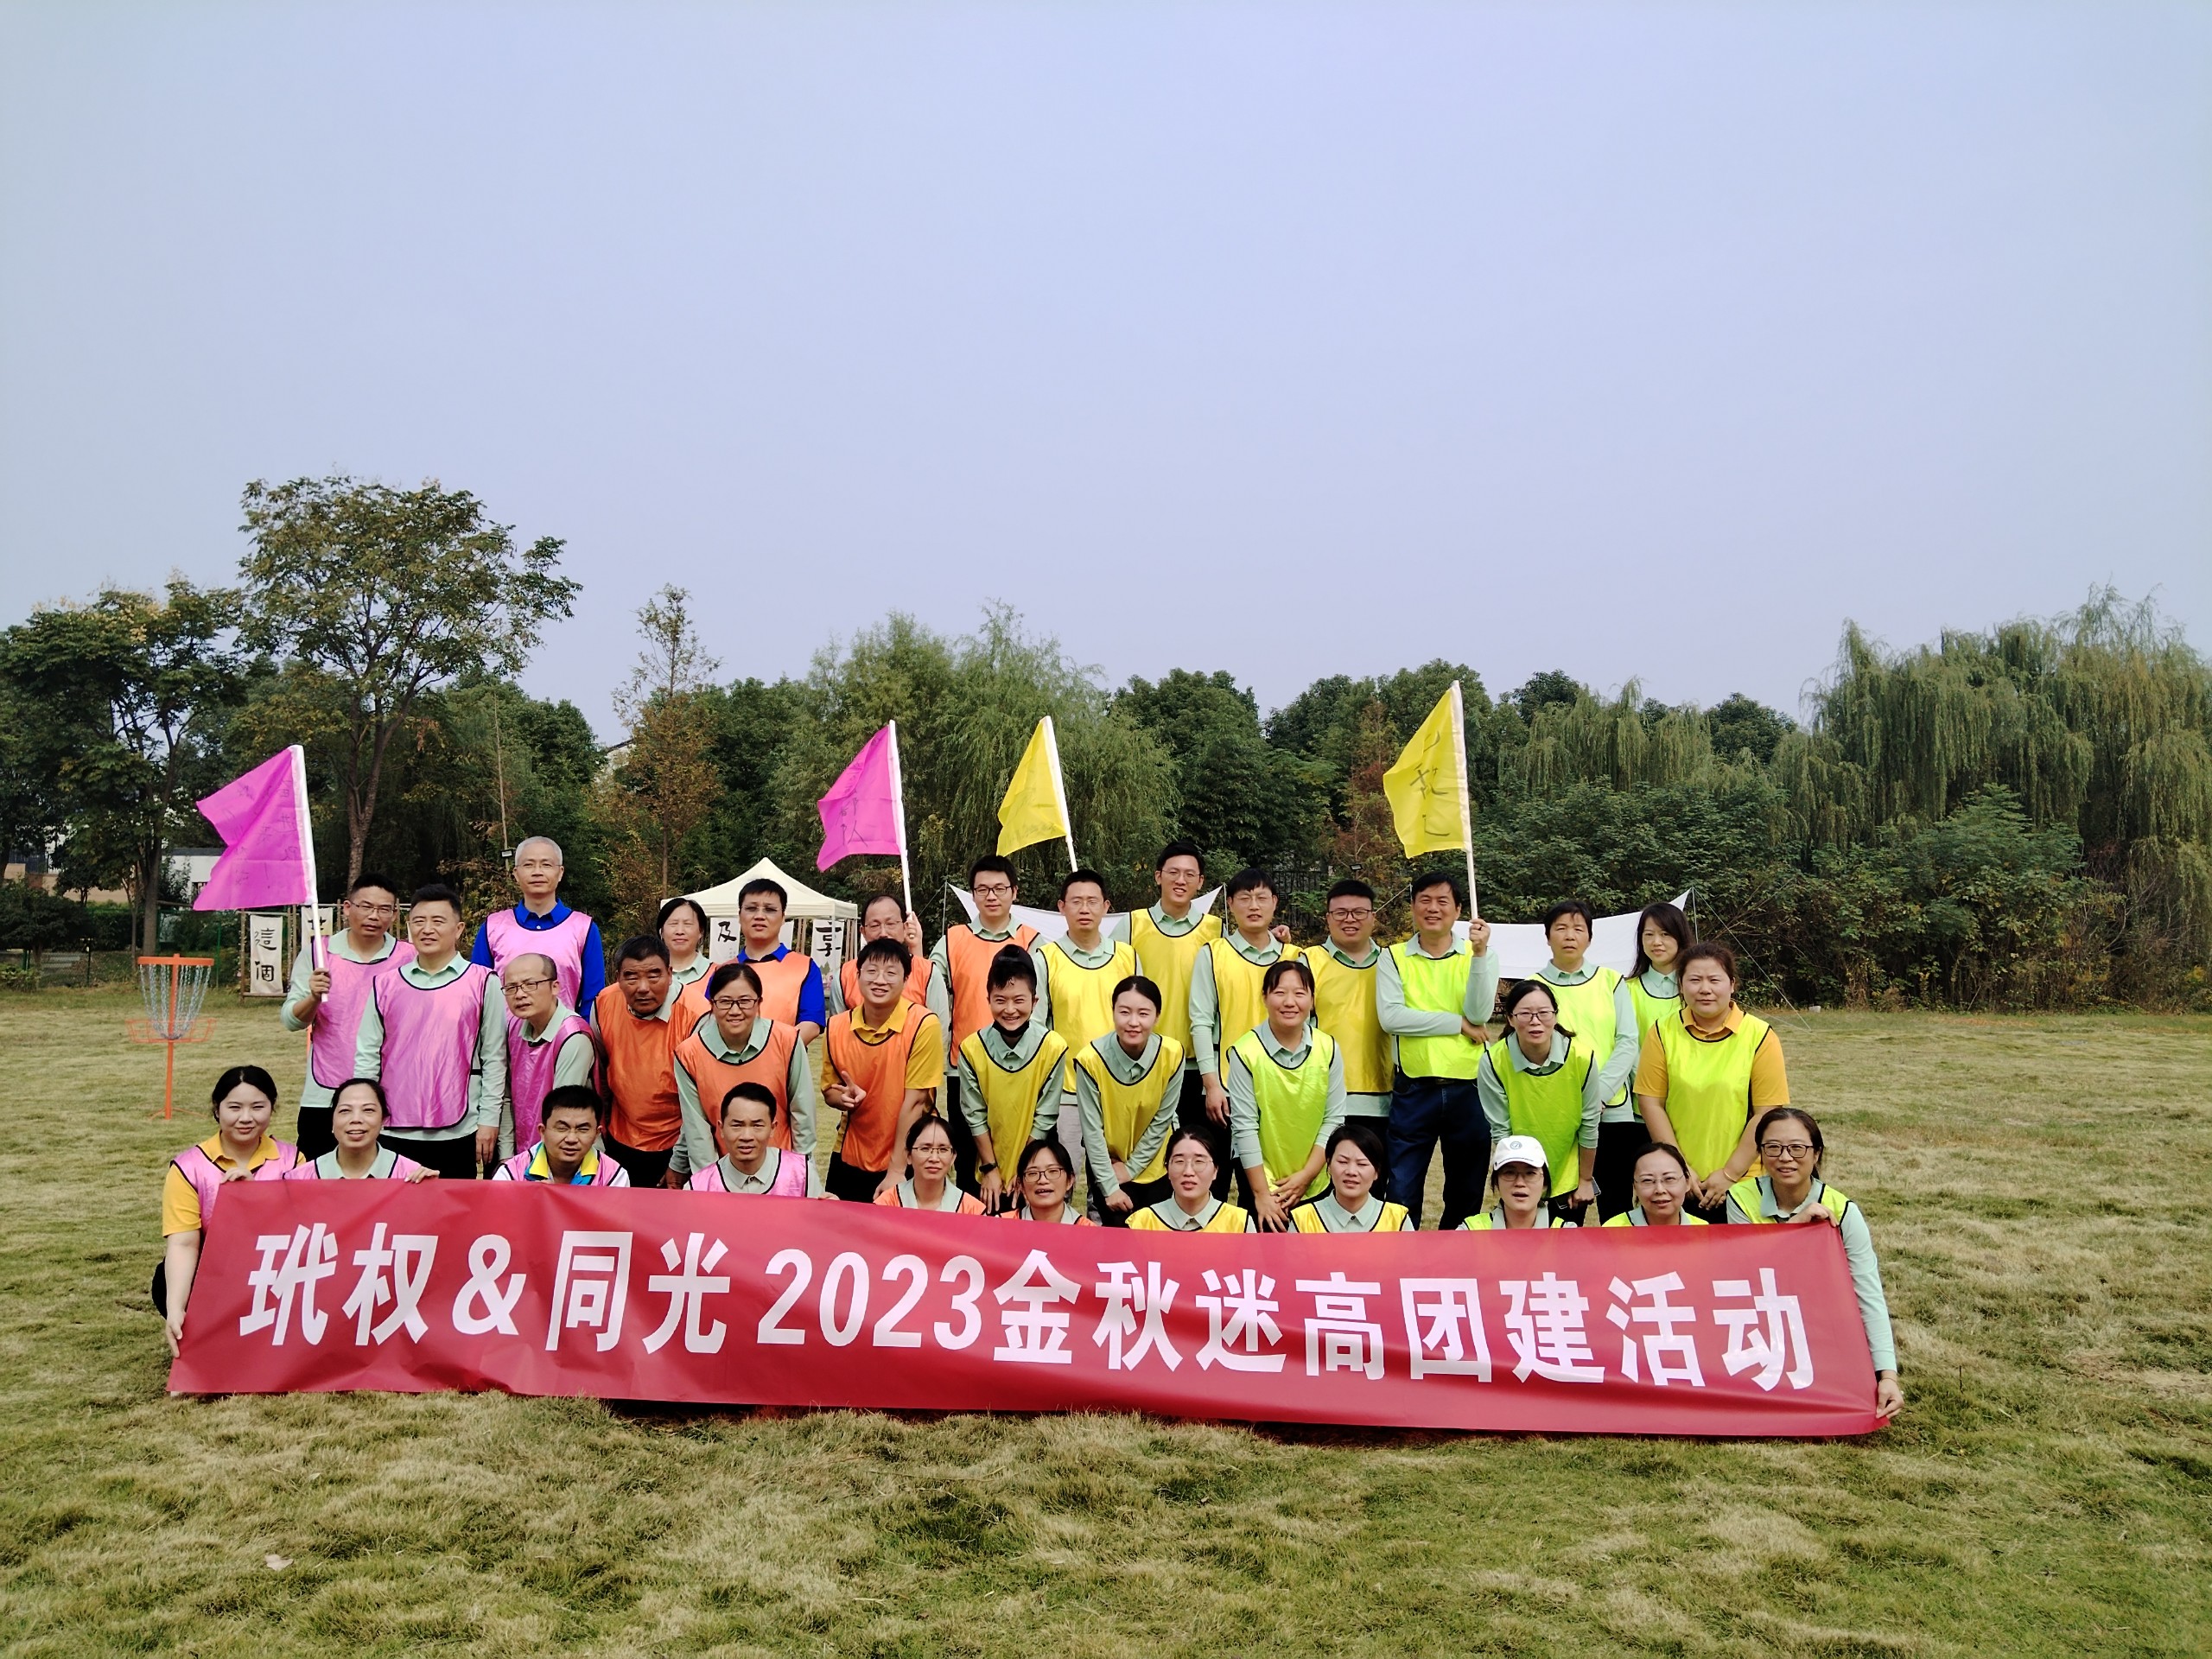 2023 Golden Autumn Youth League Building Activities Successfully Held